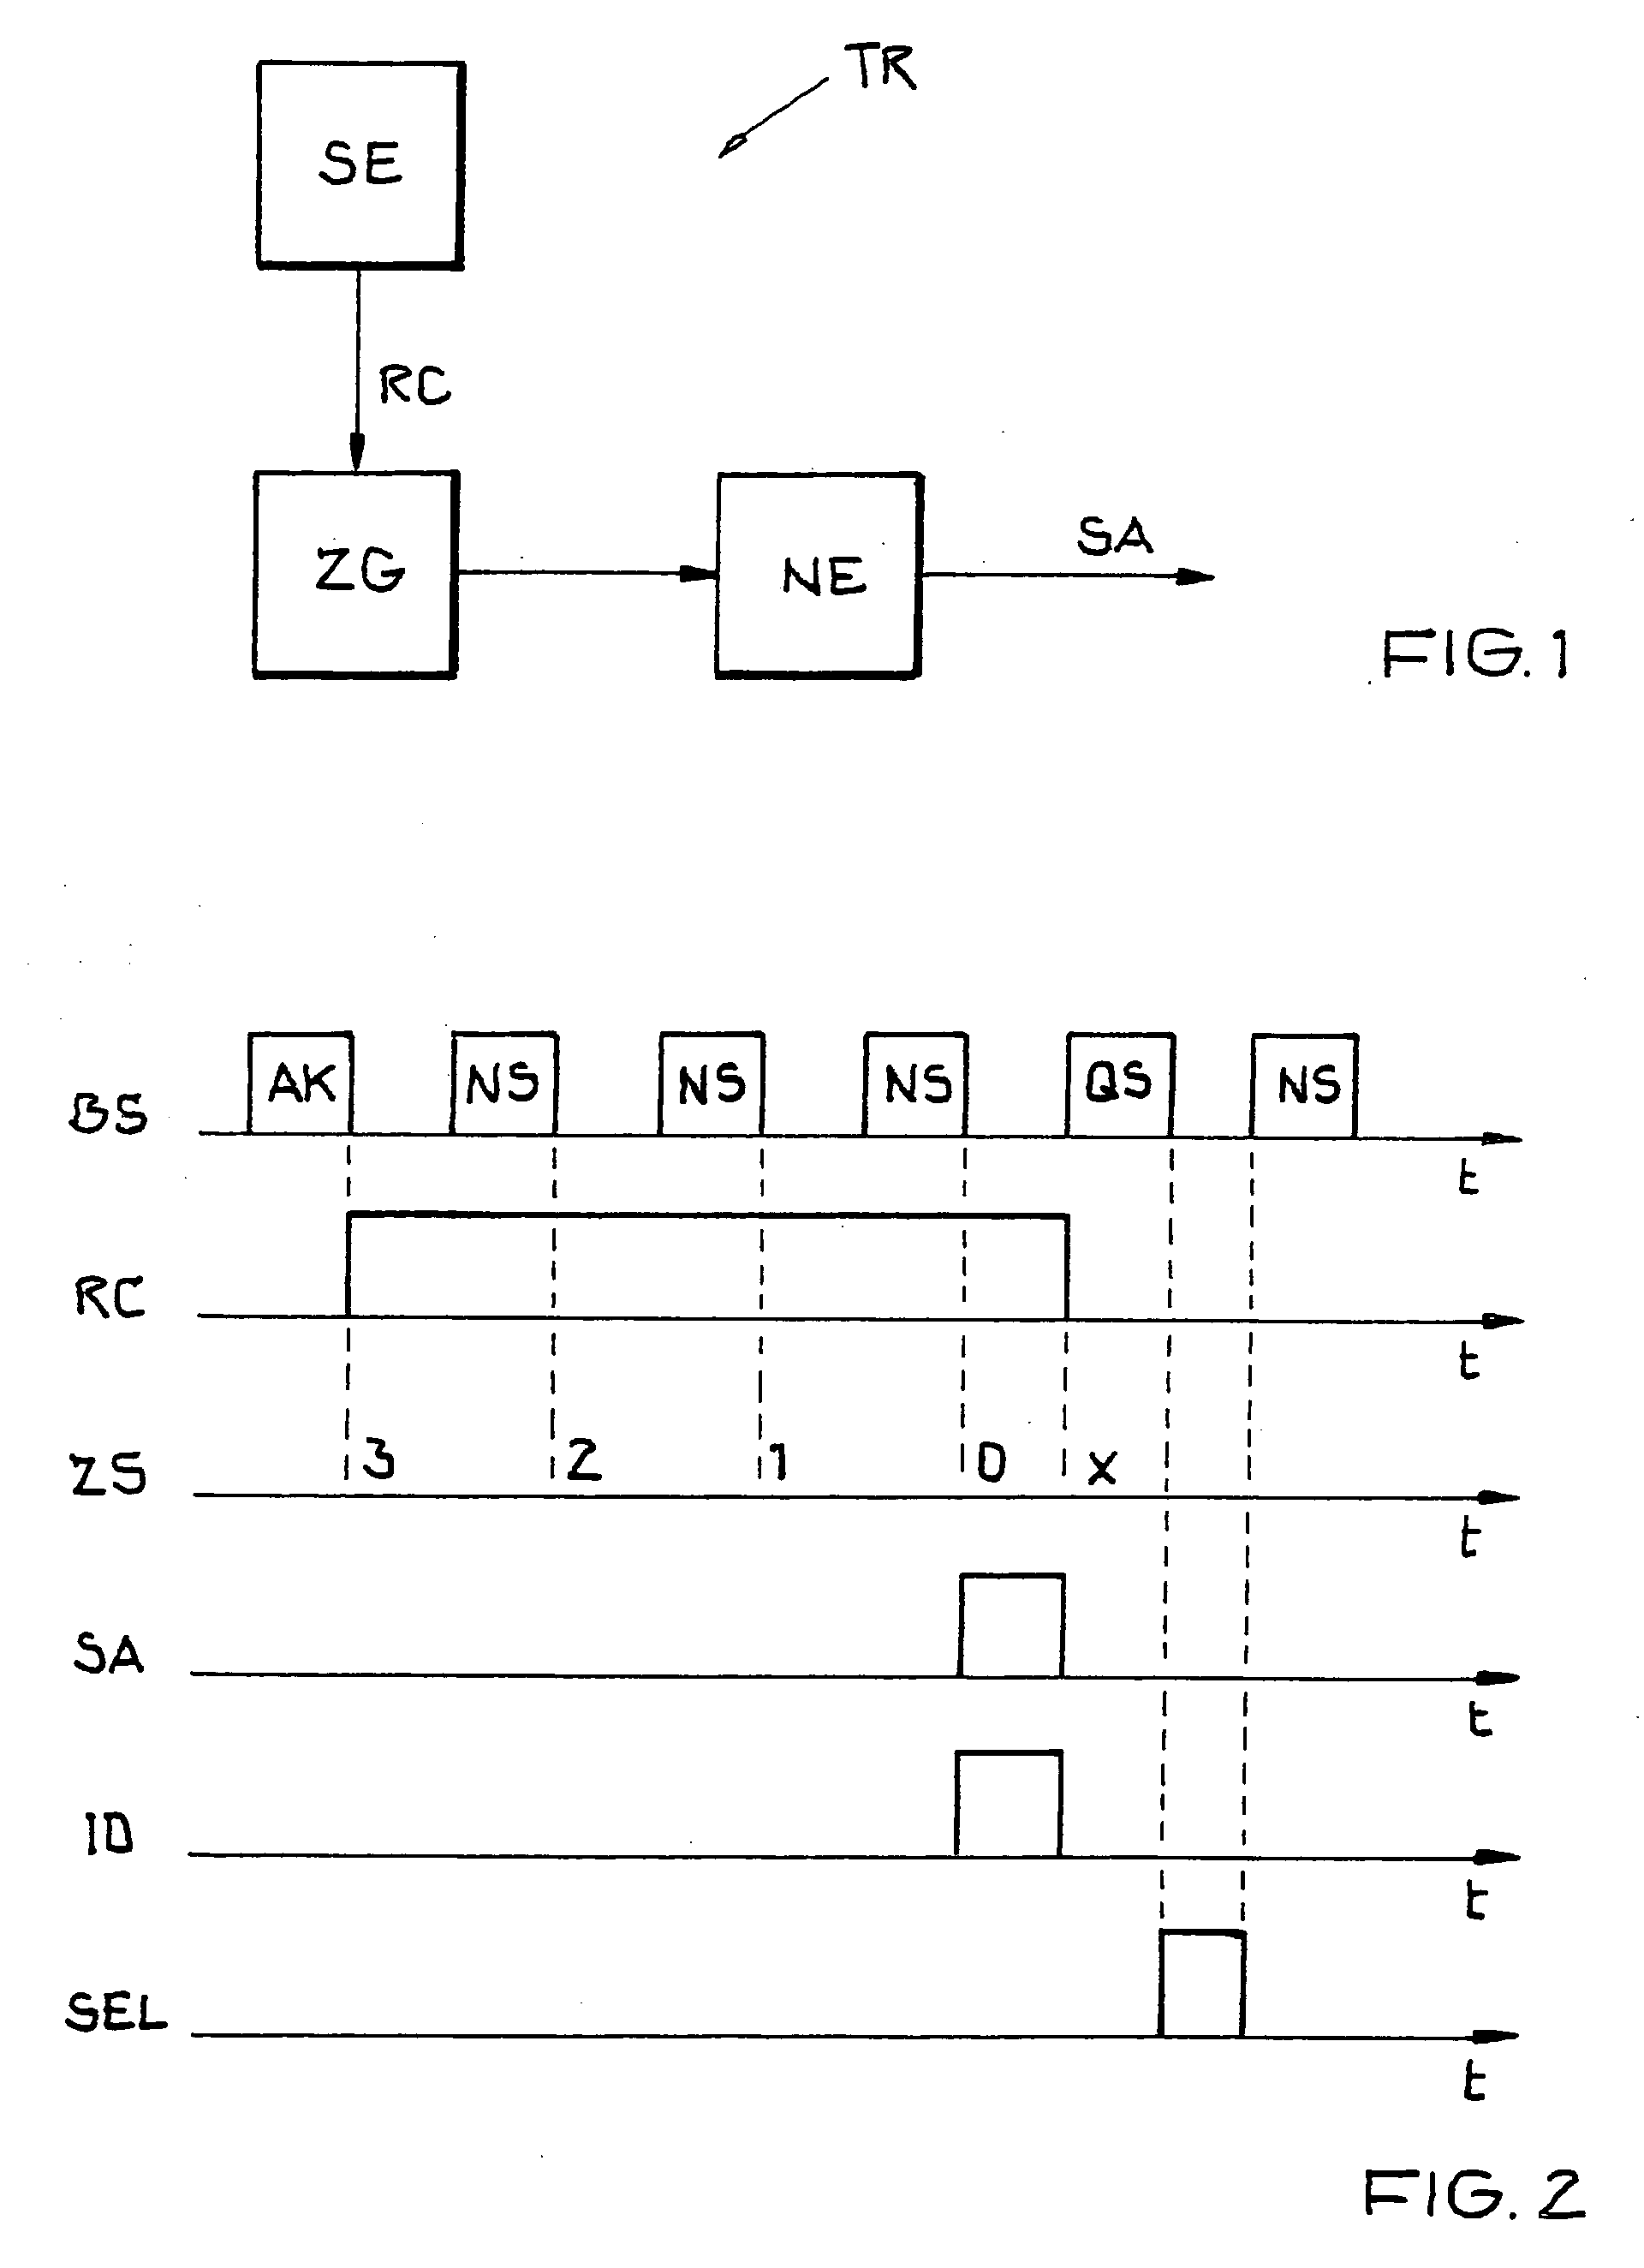 Method for selecting one or more transponders